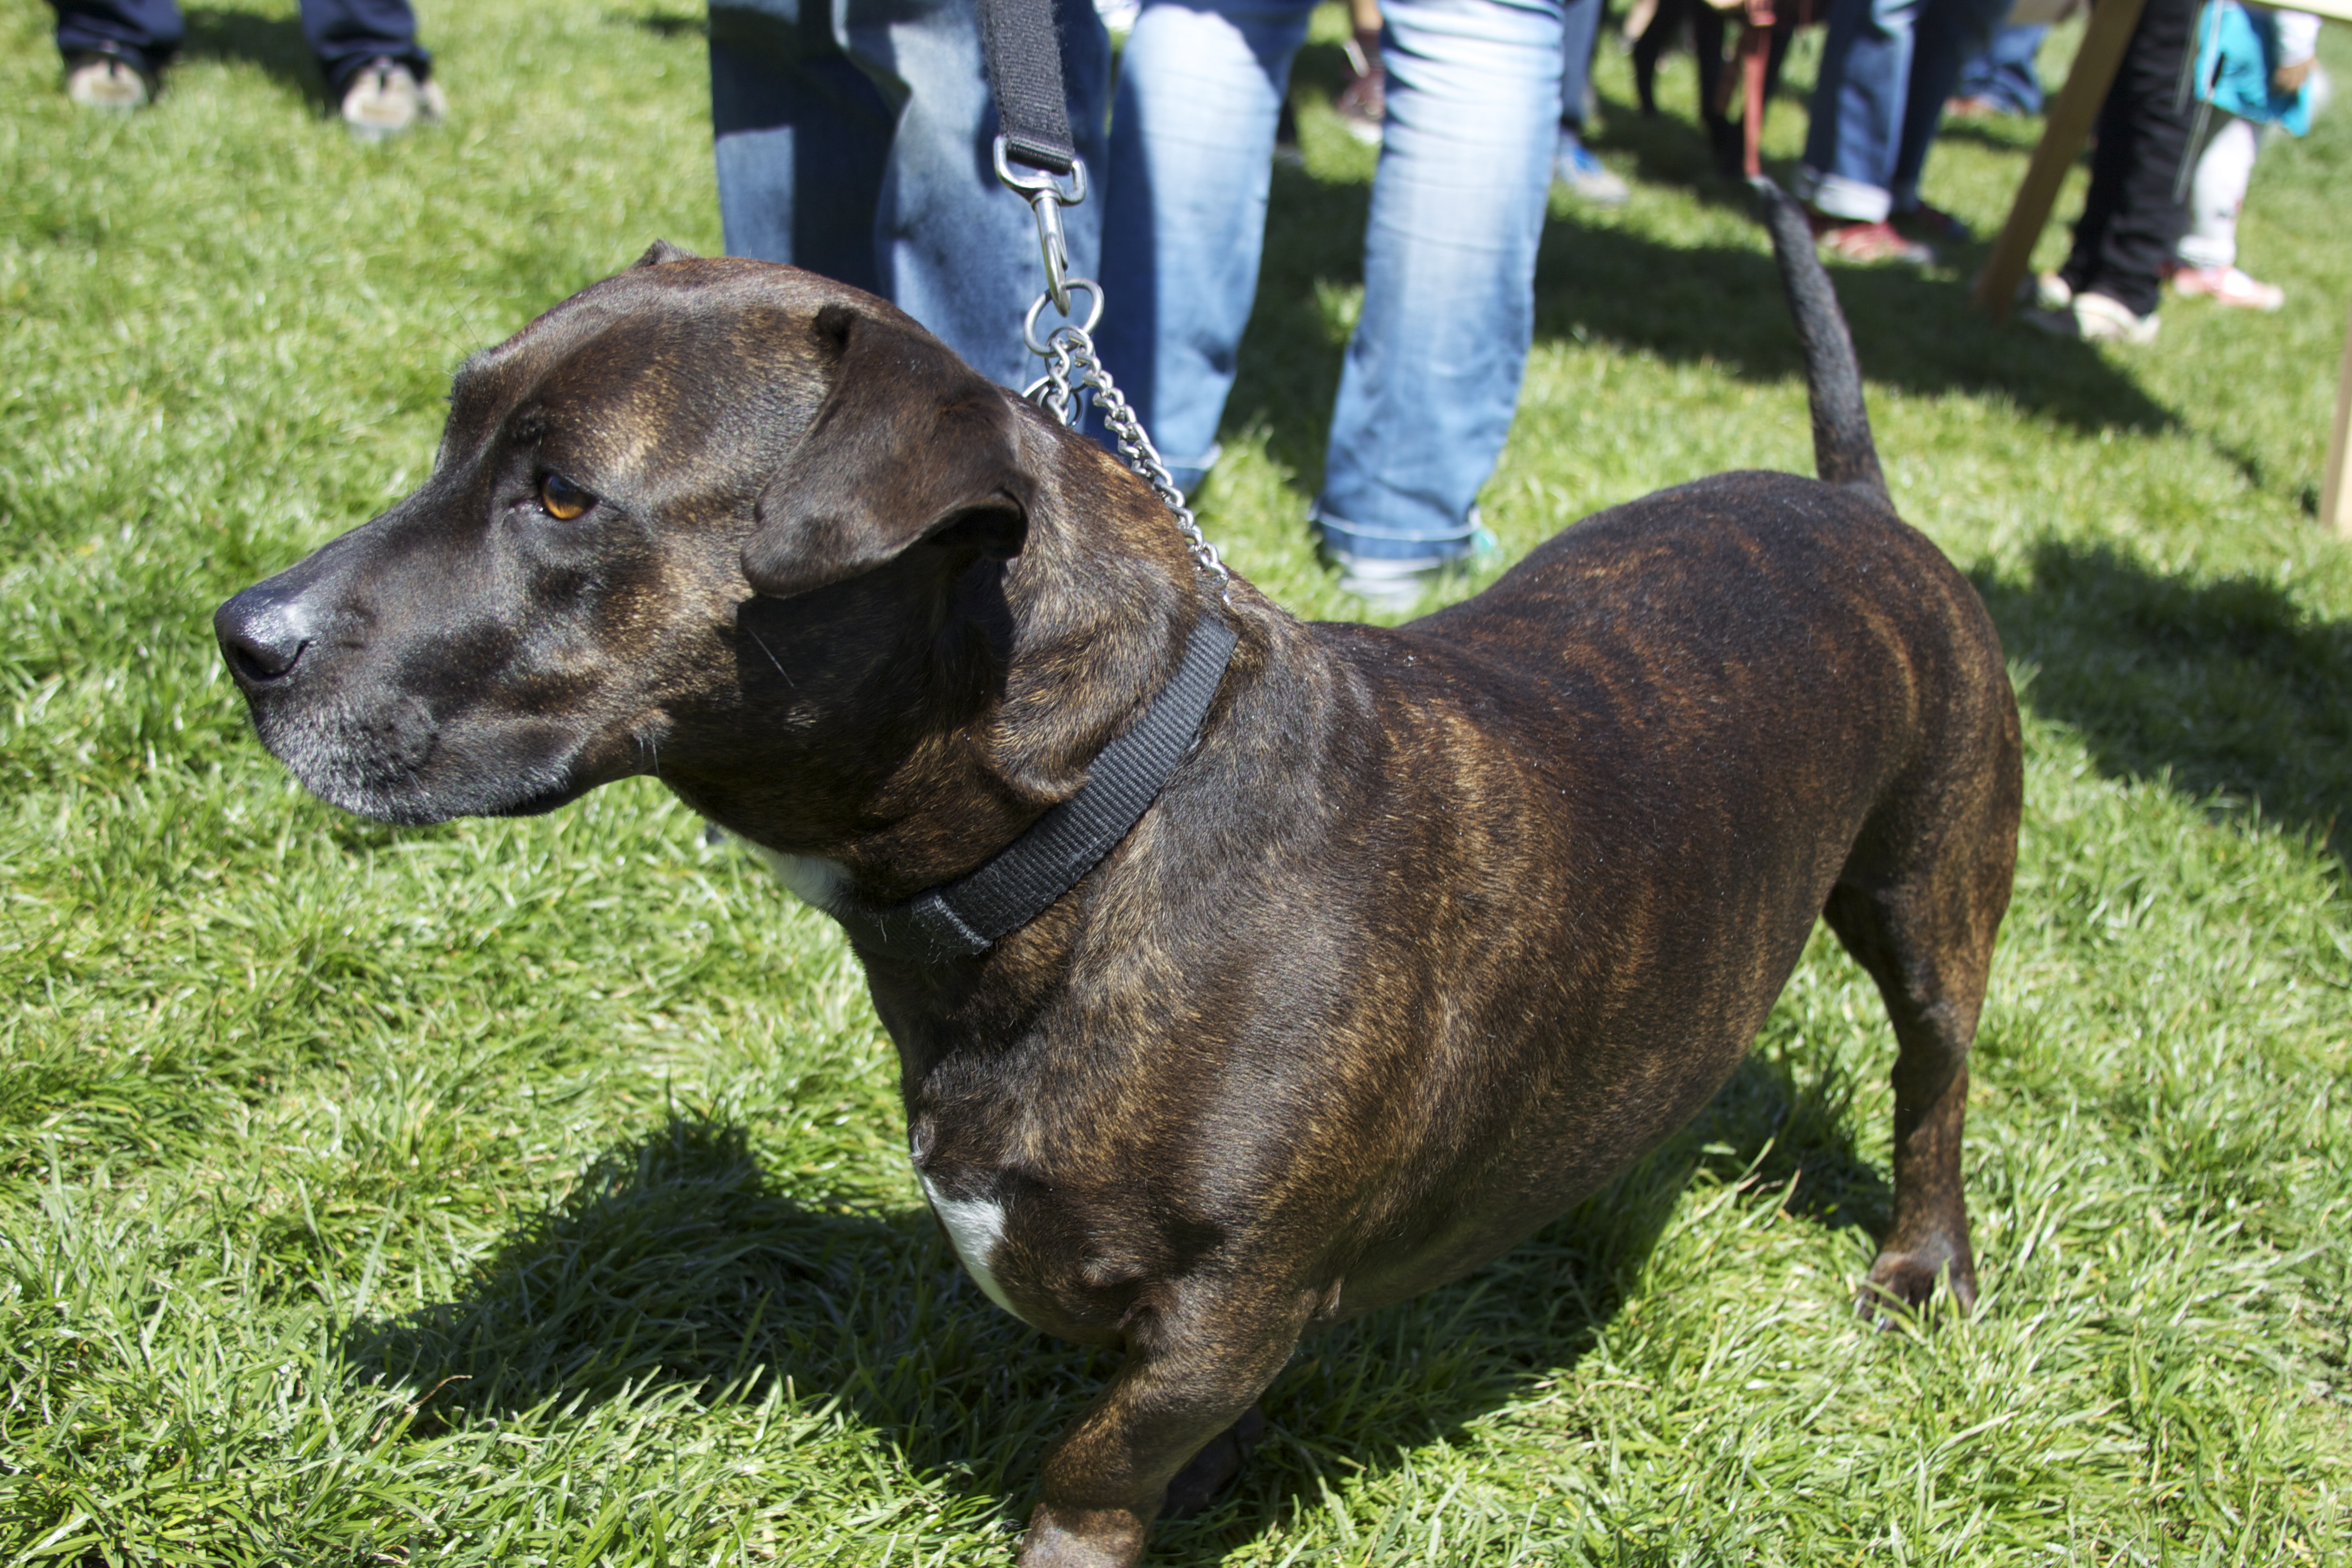 Brindle-Striped Dachshund Mix With White Spot on Chest